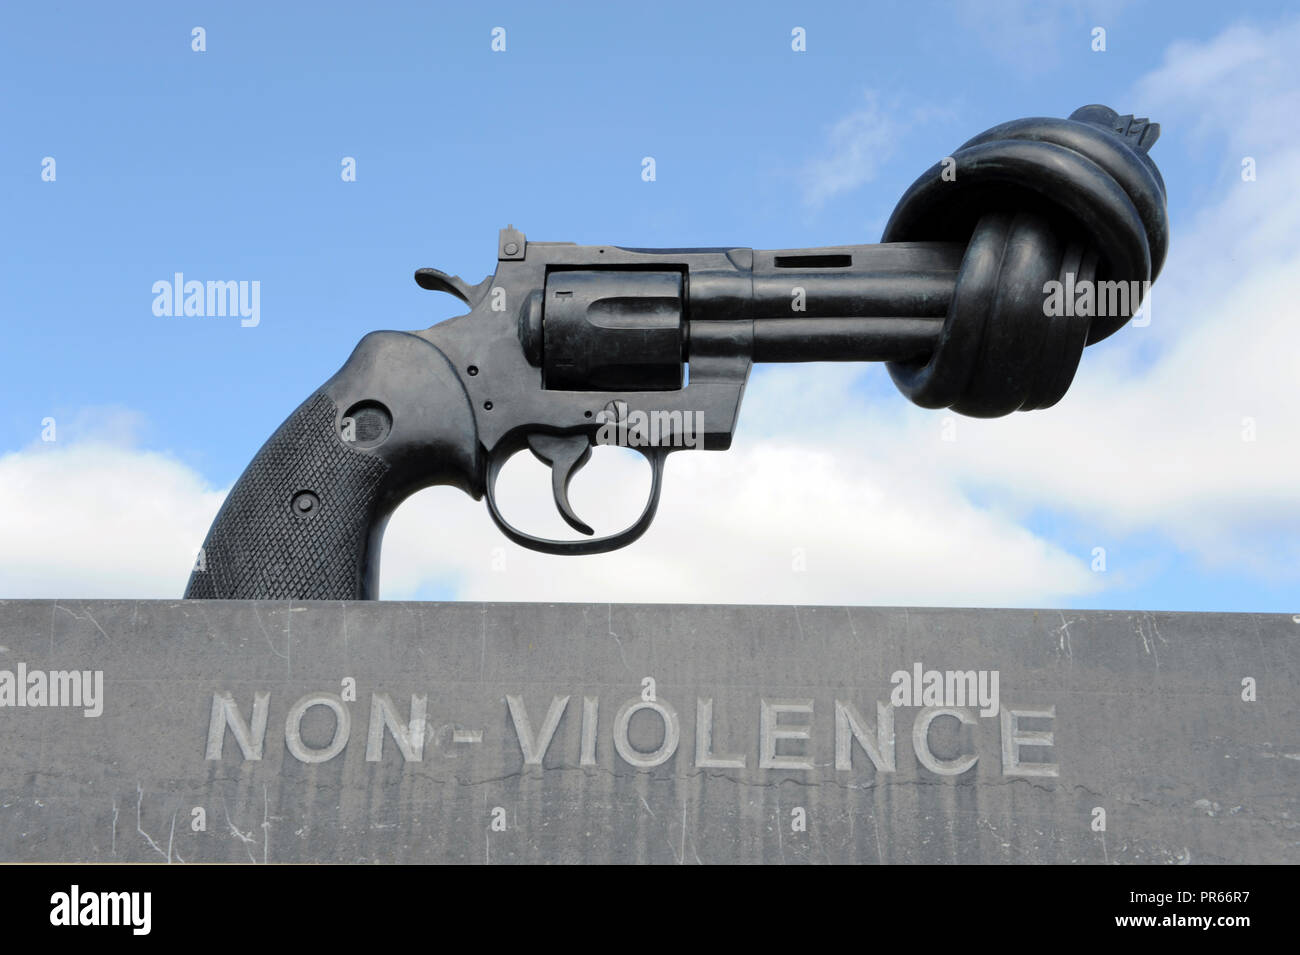 Metallic sculpture of a knotted gun representing non-violence campaign at world war II D Day Normandy beach France Europe Stock Photo